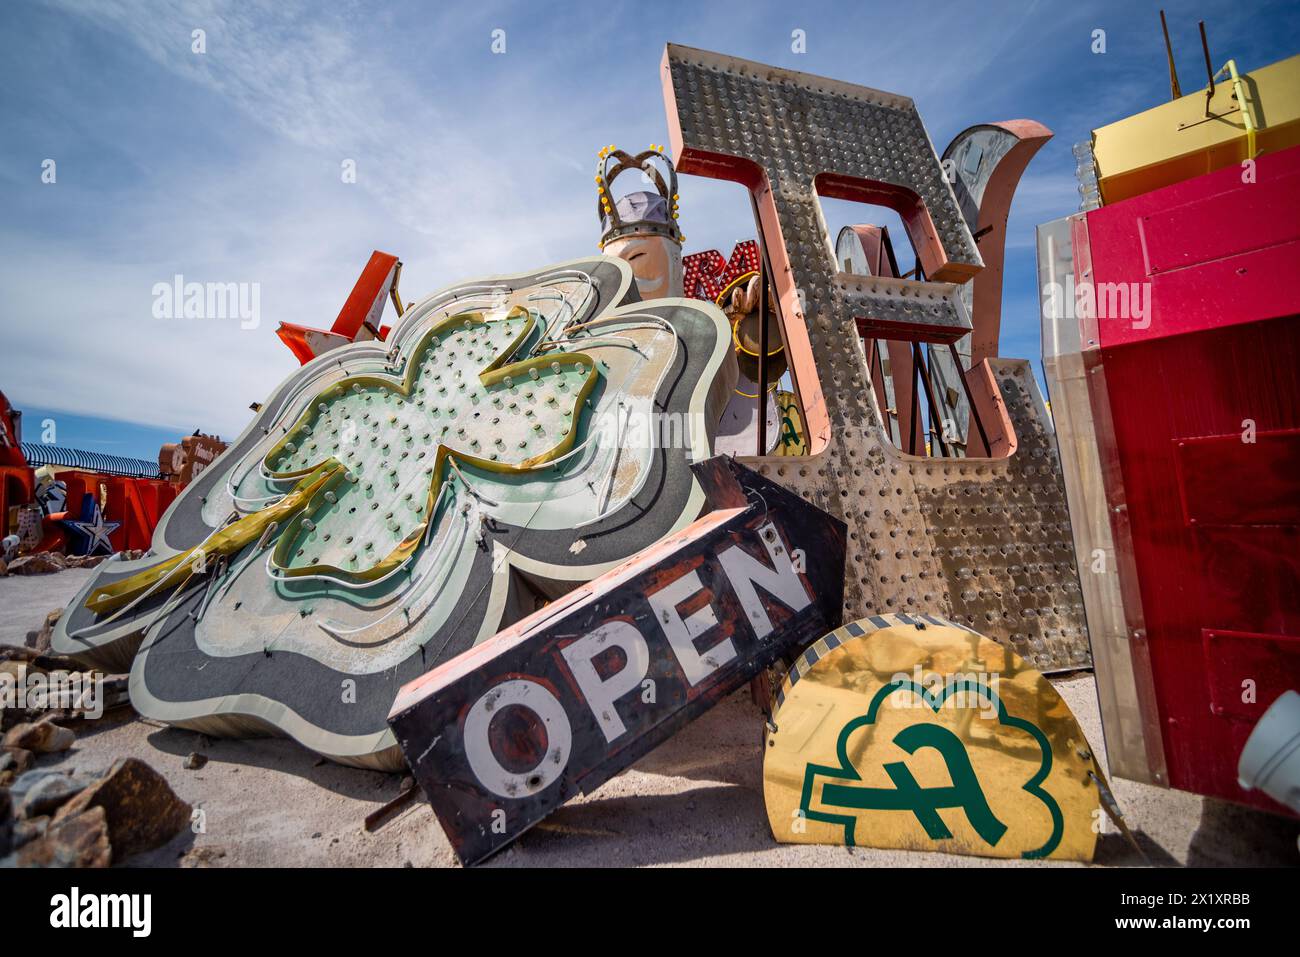 Abandoned and discarded neon Open sign in the Neon Museum aka Neon boneyard in Las Vegas, Nevada. Stock Photo